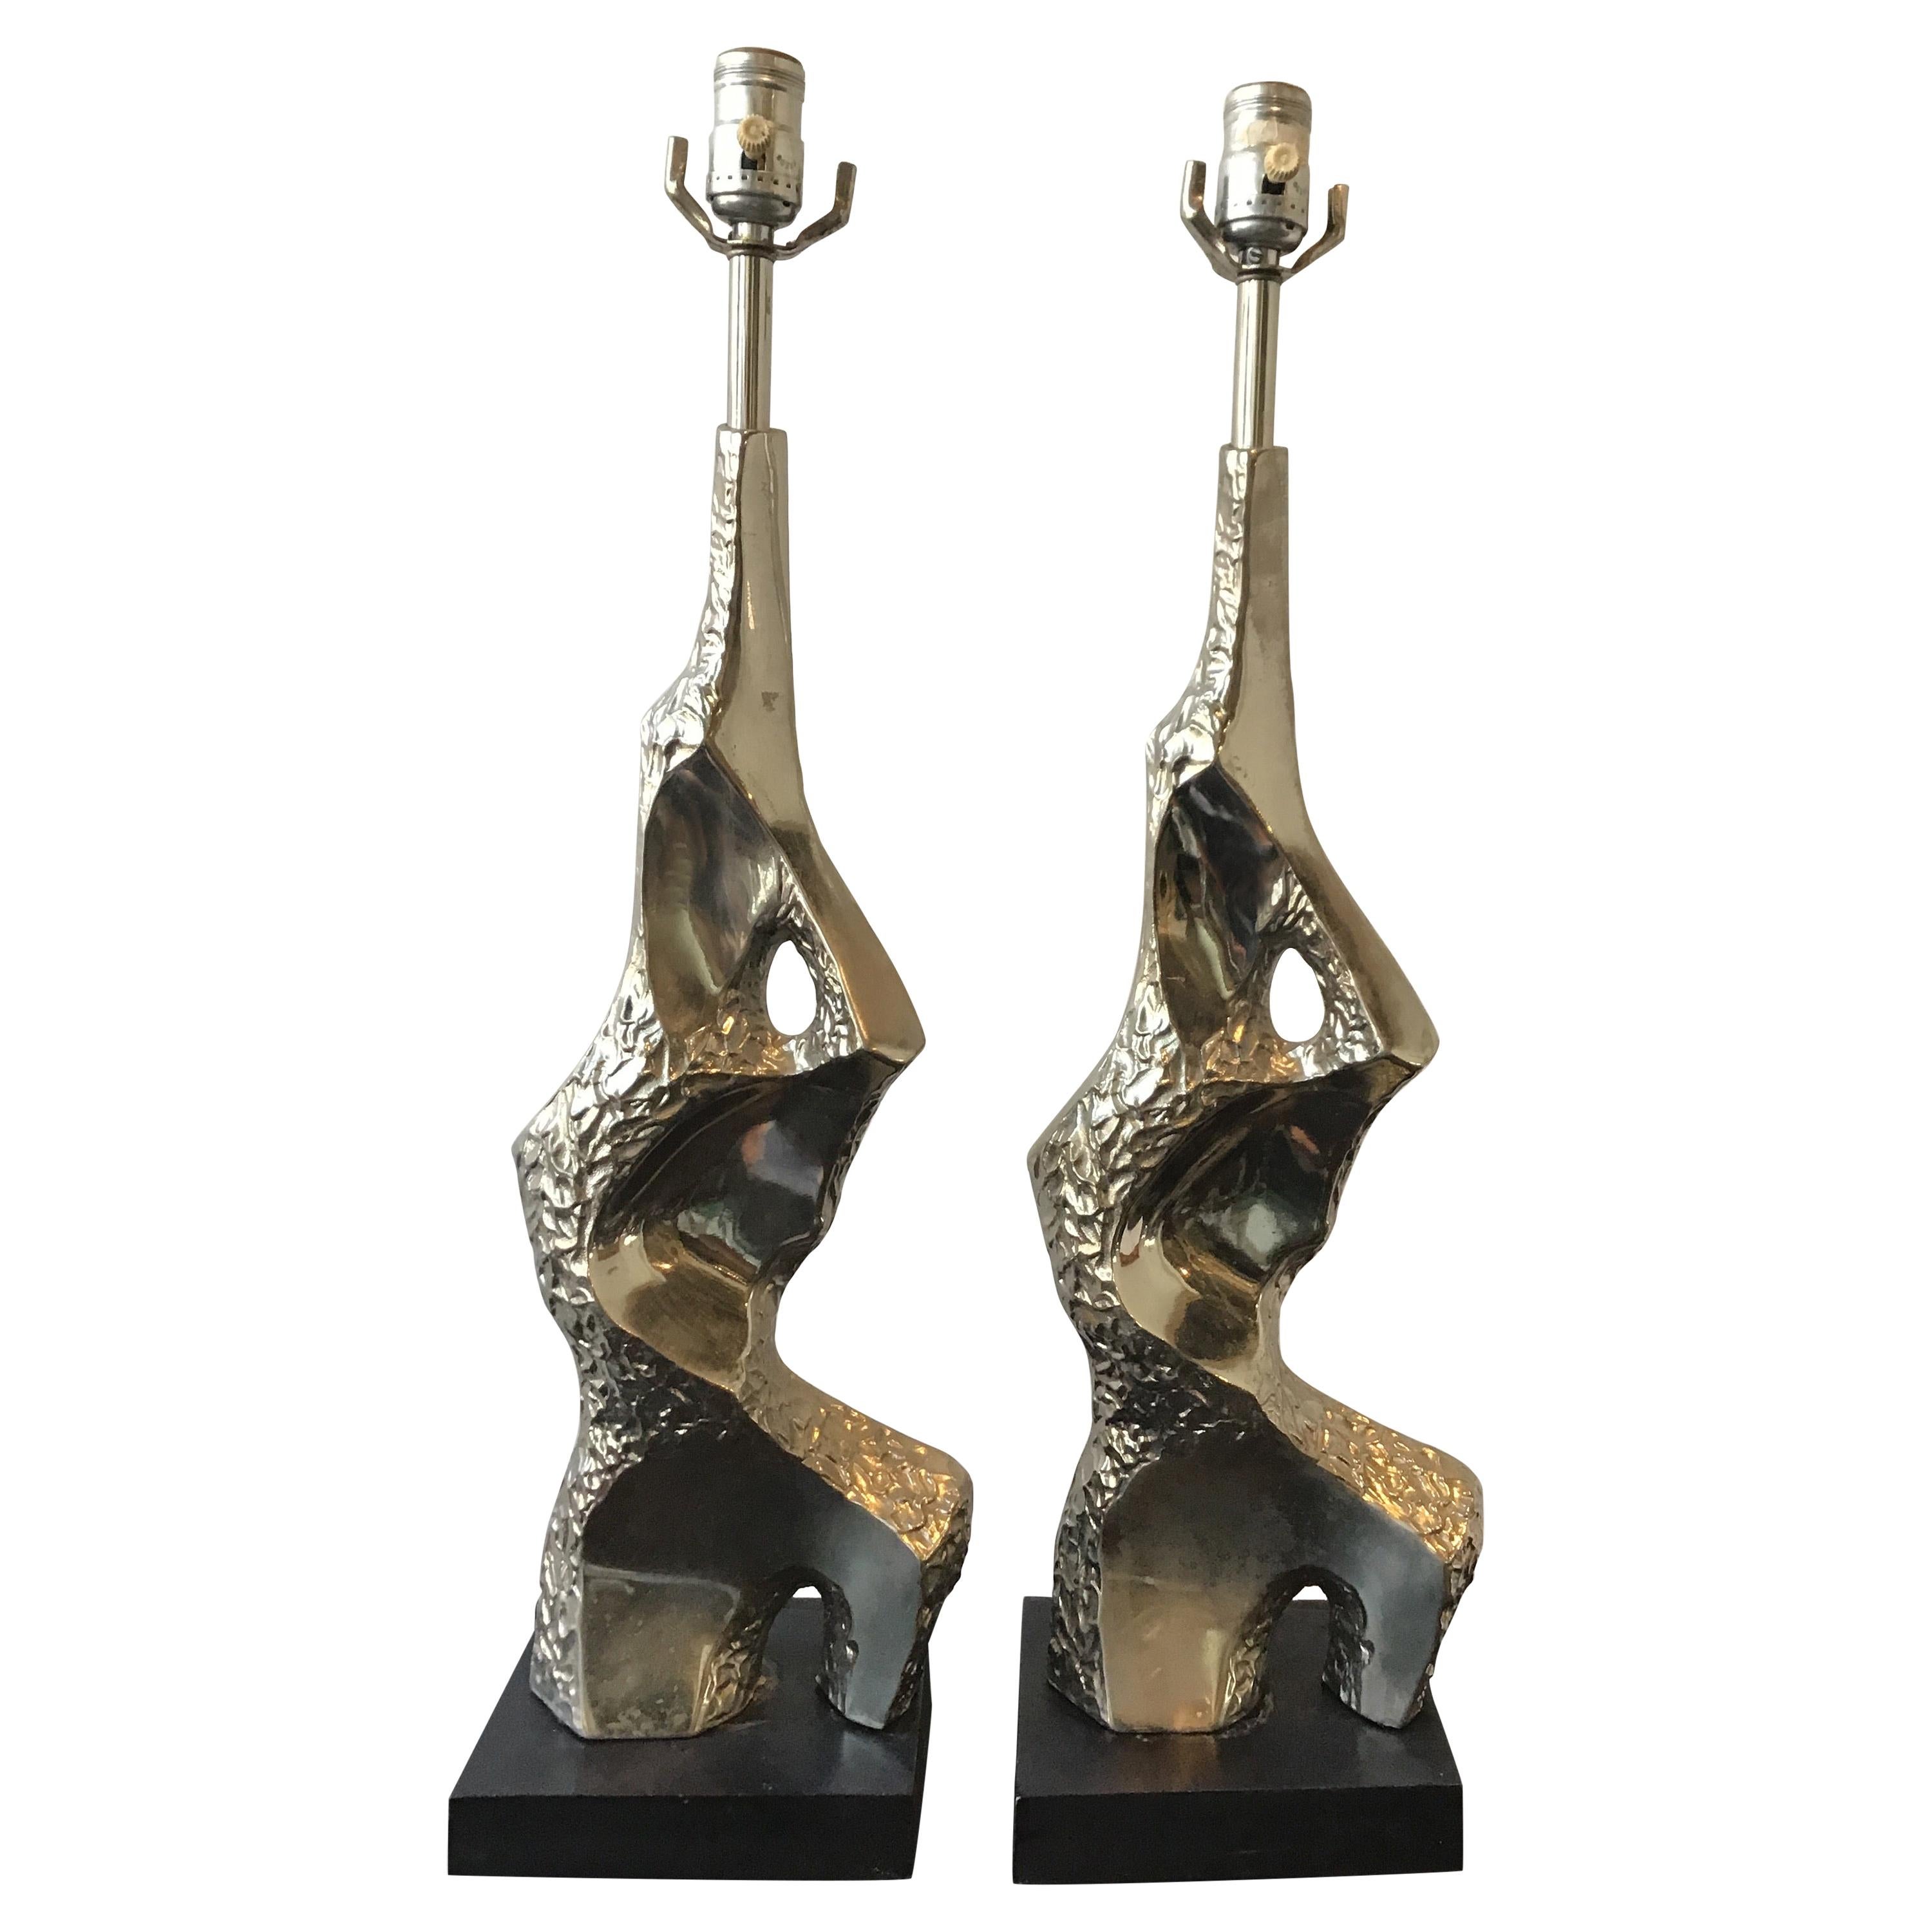 Pair of 1960s Chrome Brutalist Lamps by Richard Barr for Laurel